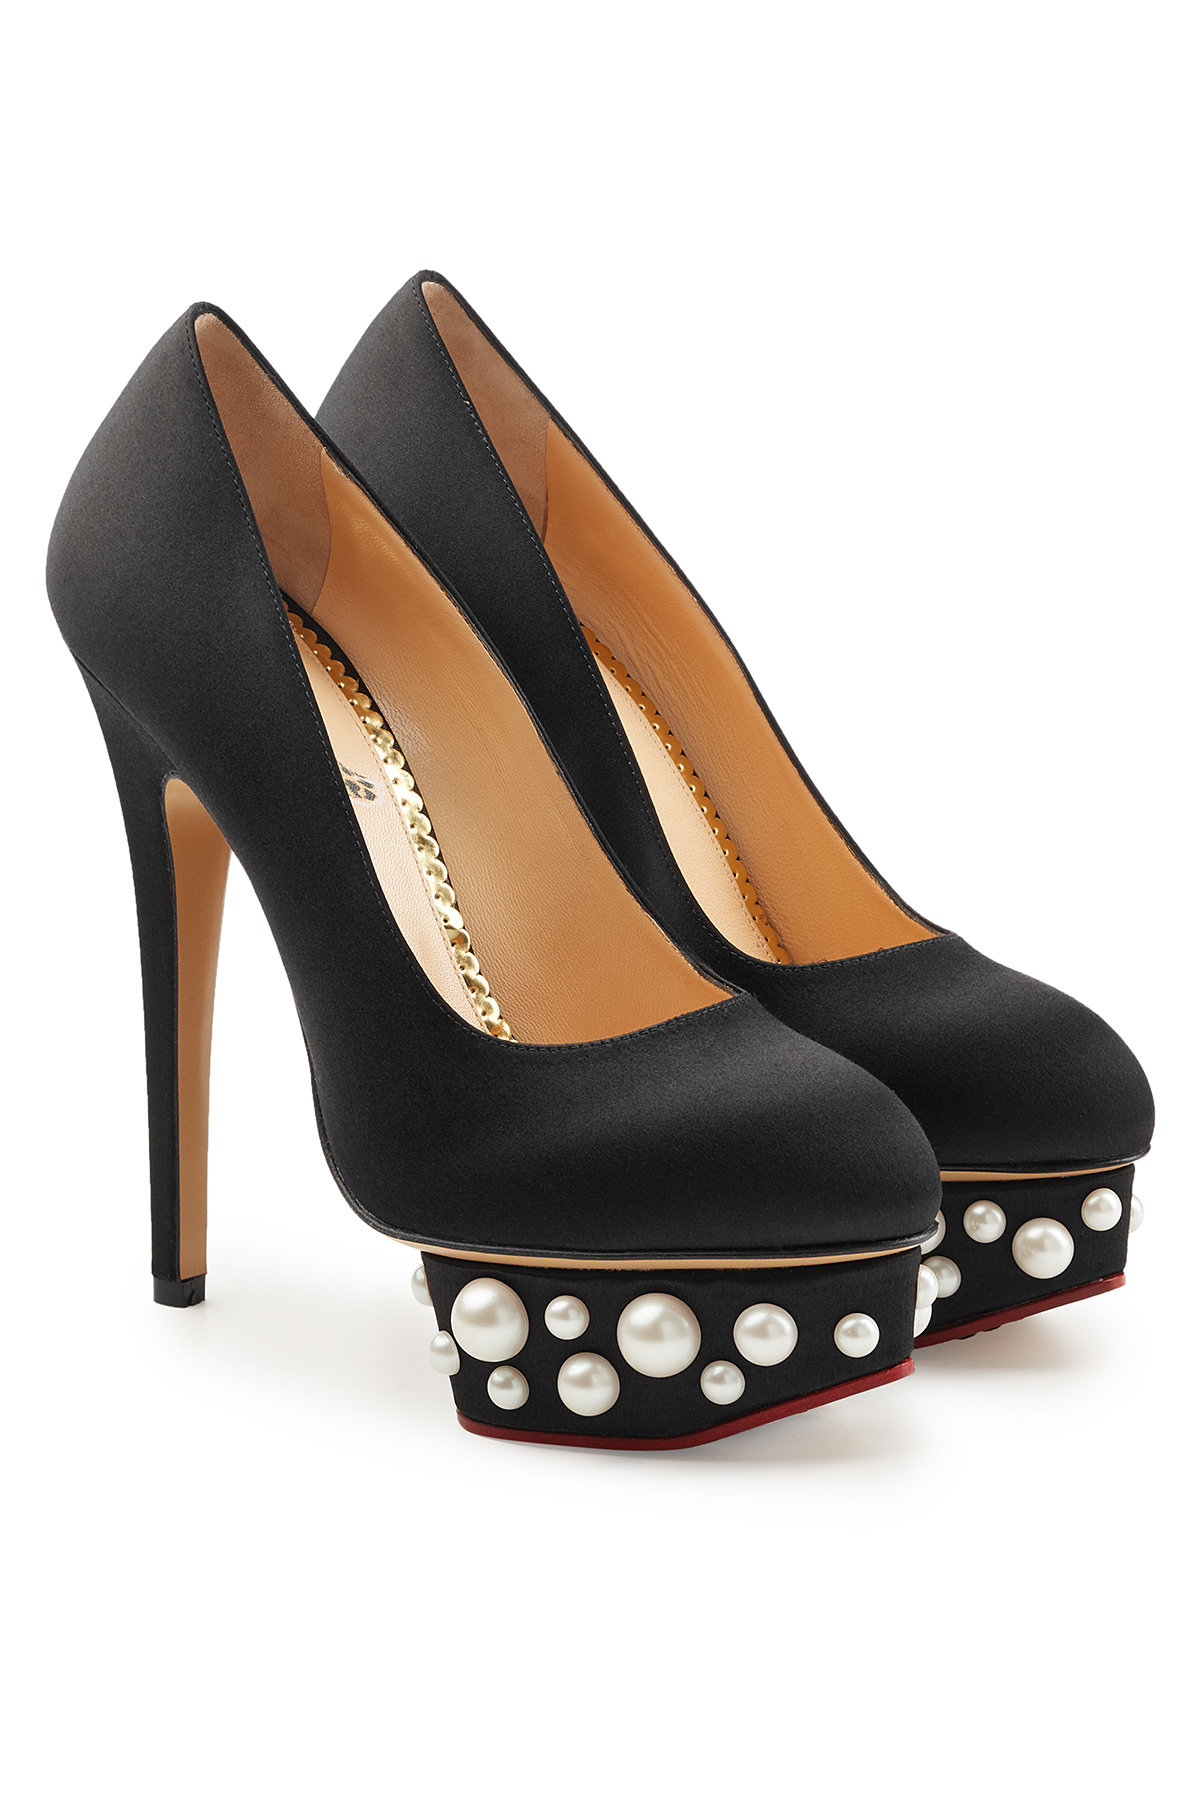 Dolly Pearl Signature Island Platform Pumps by Charlotte Olympia